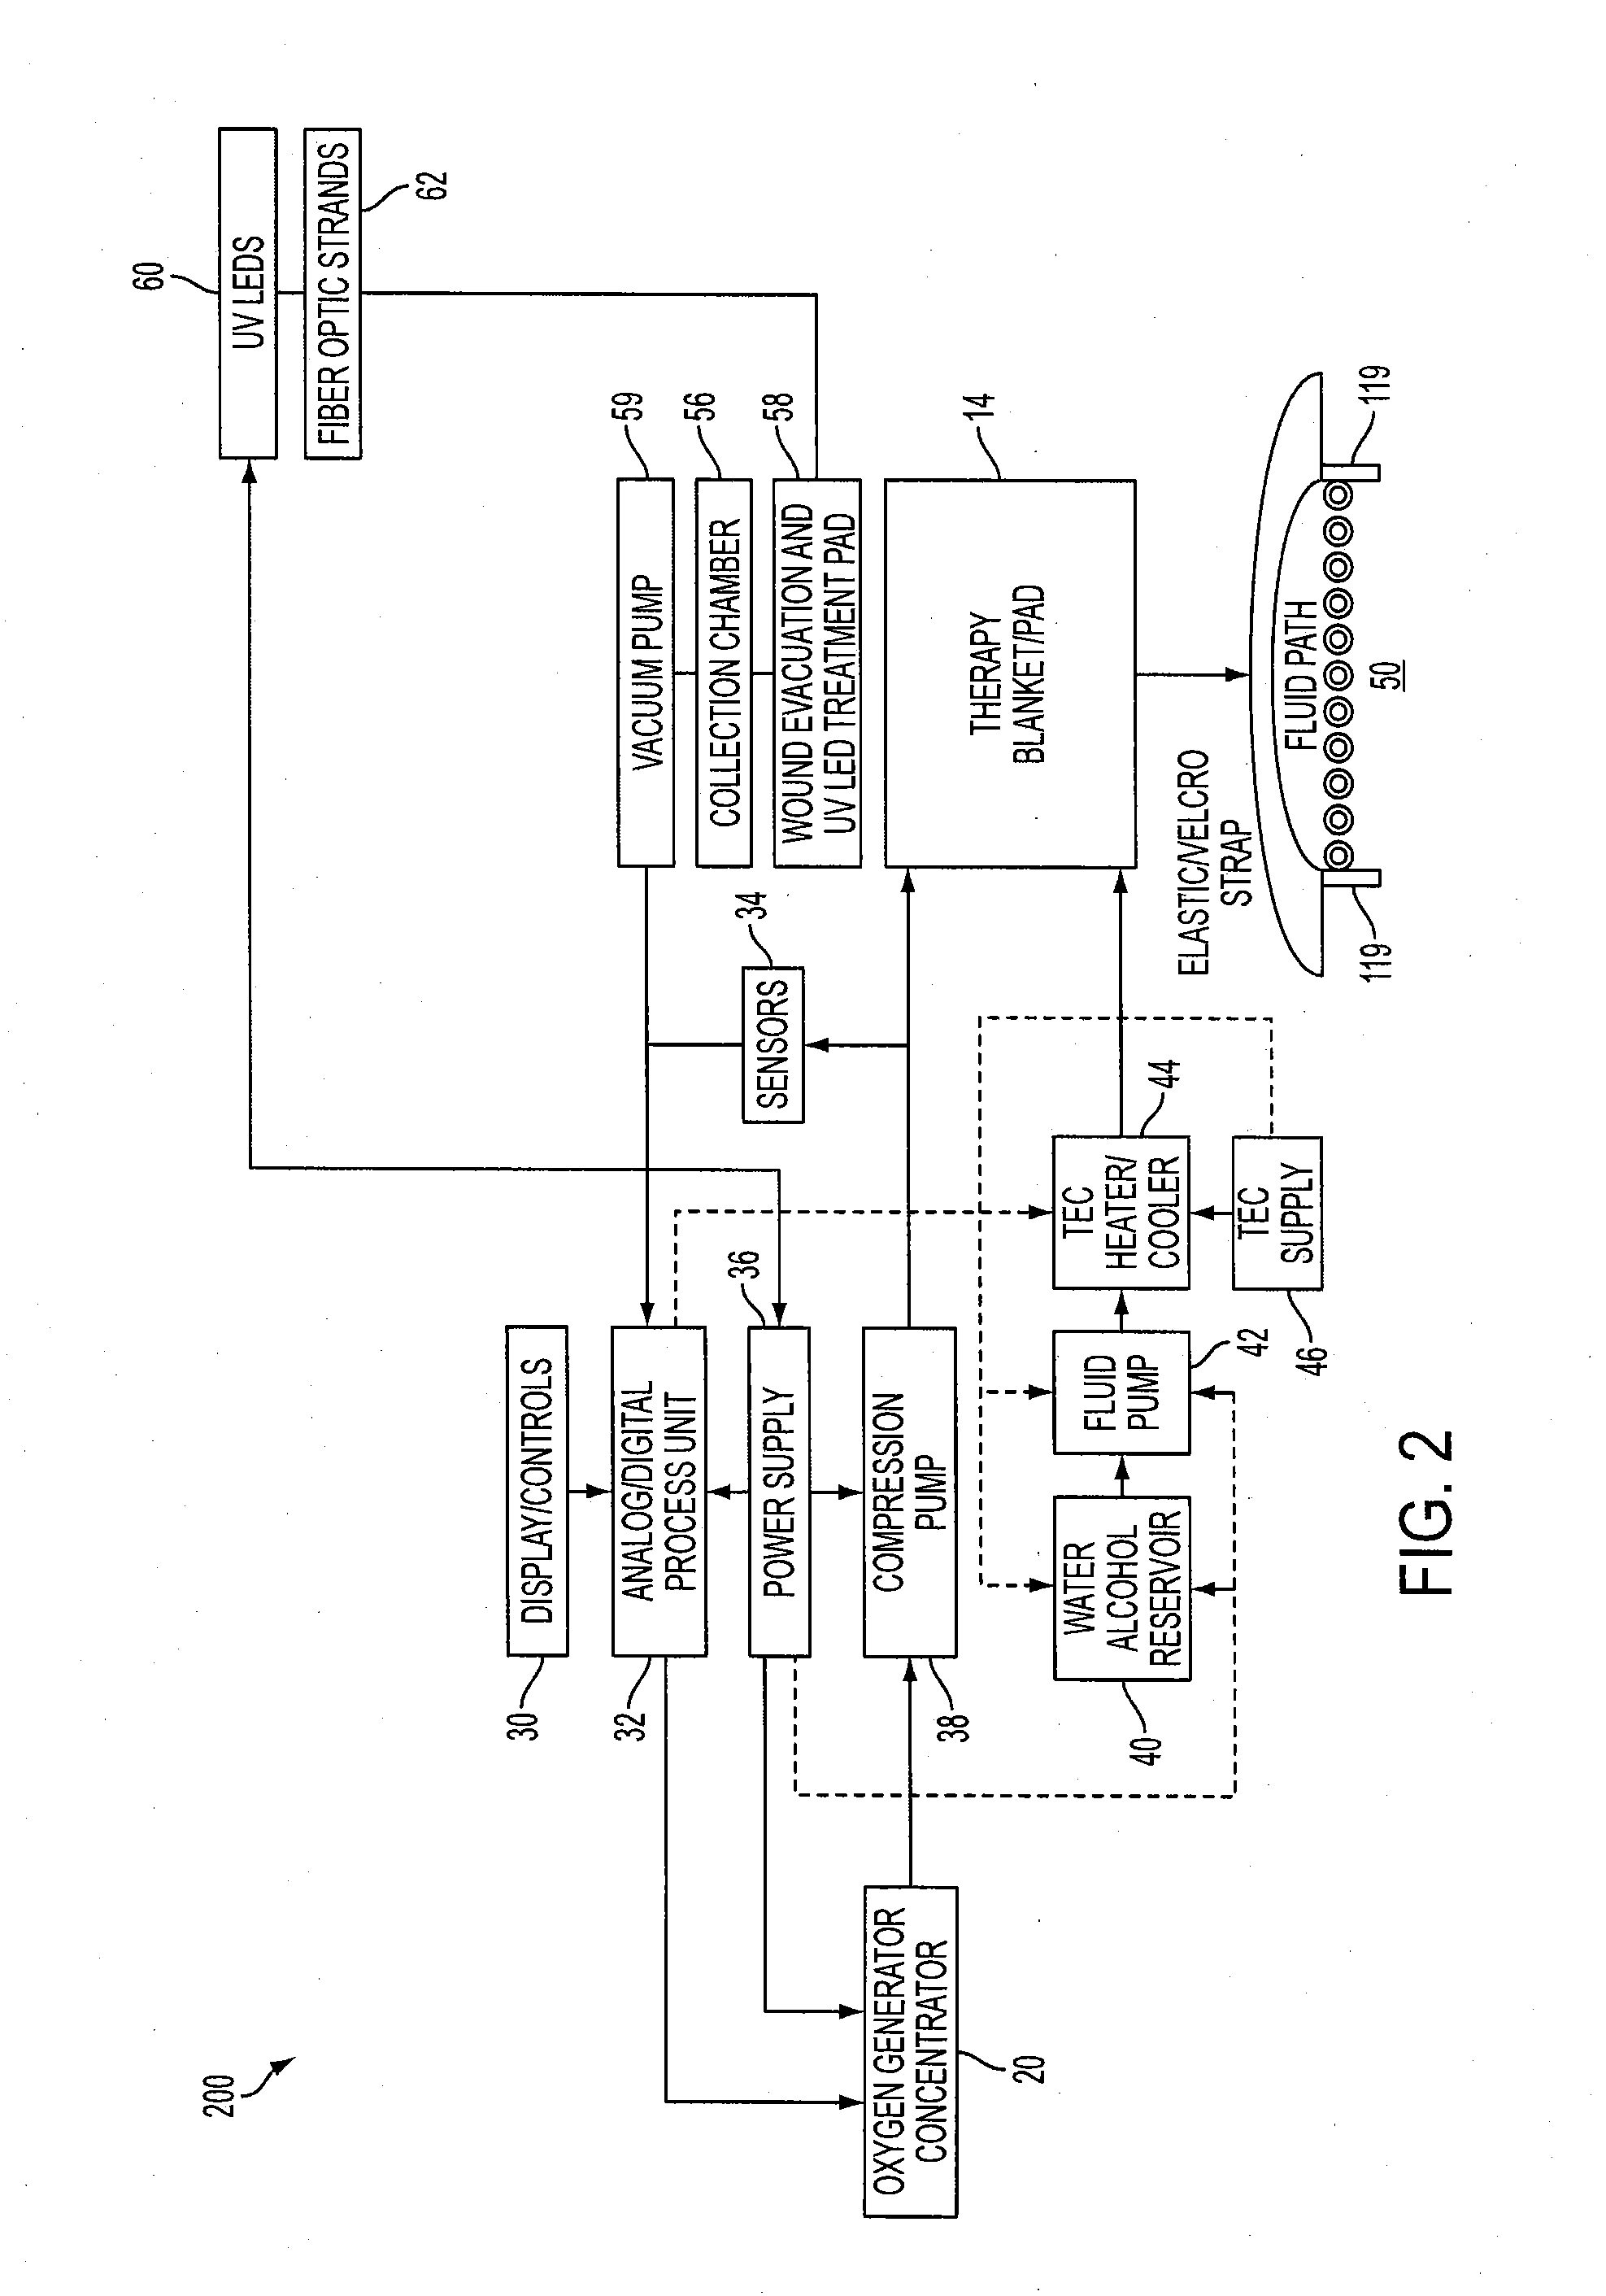 Wound care method and system with one or both of vacuum-light therapy and thermally augmented oxygenation